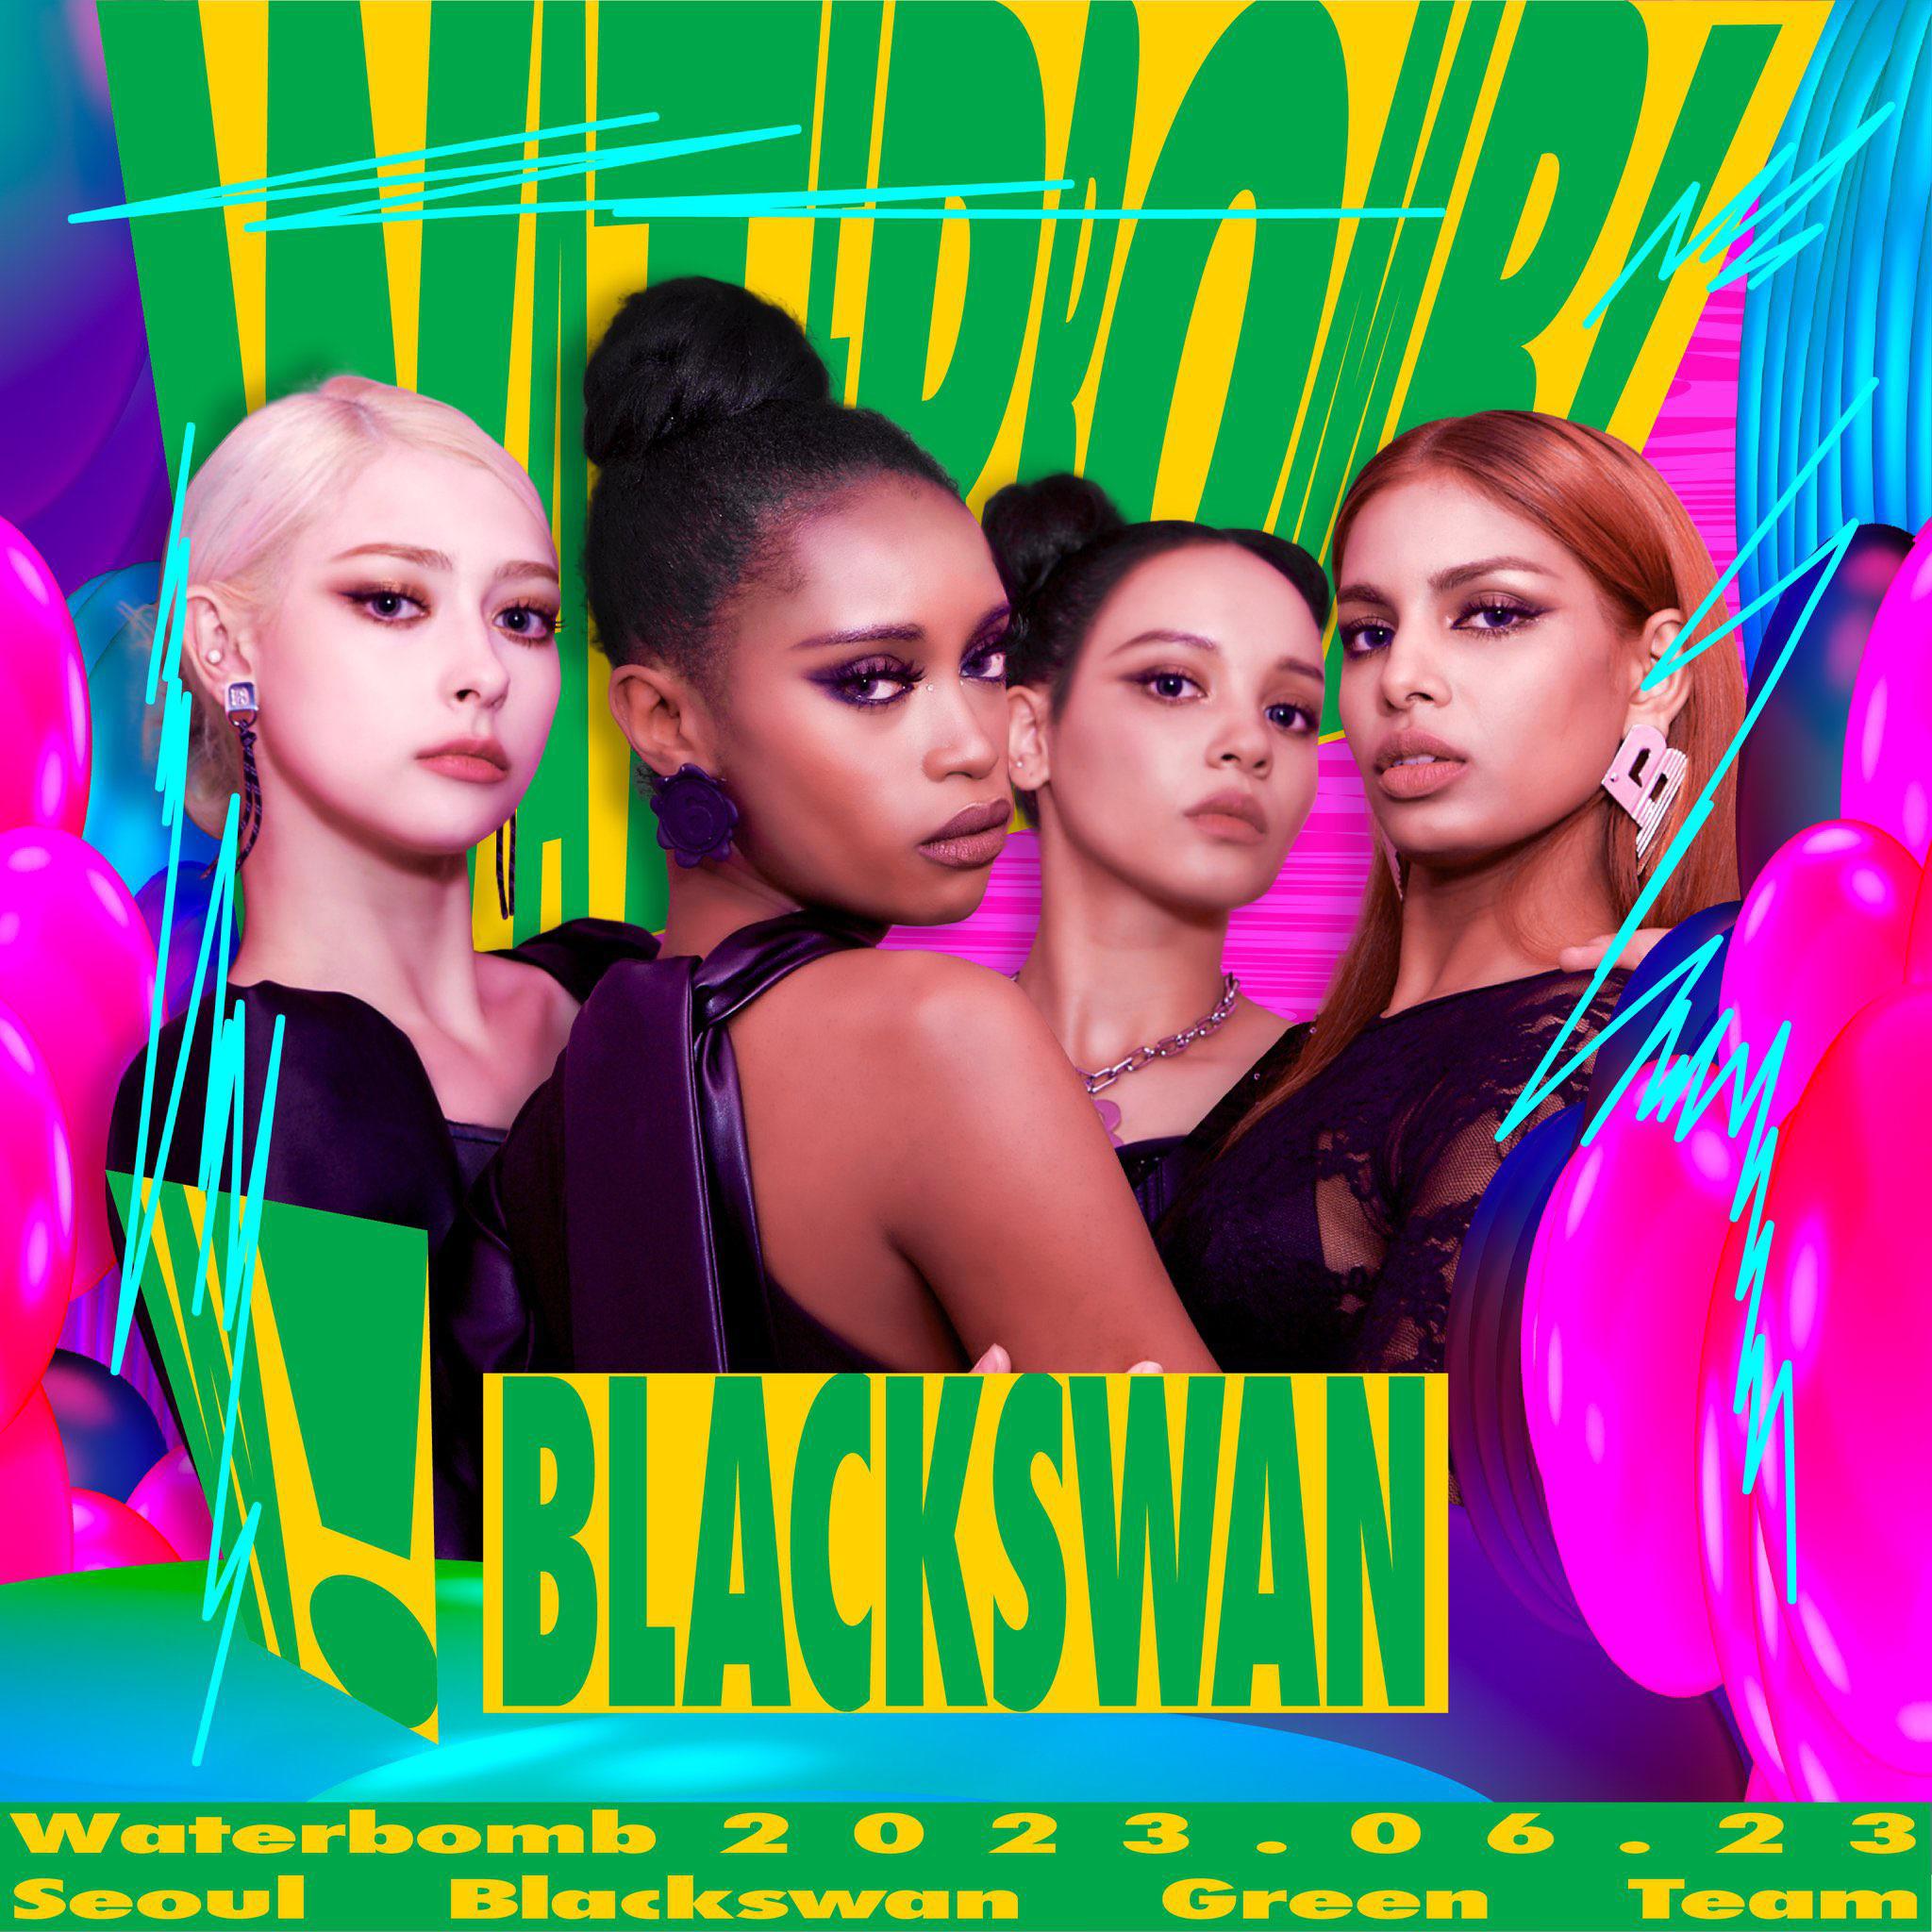 BLACKSWAN announced as part of the lineup for 2023 Waterbomb Festival